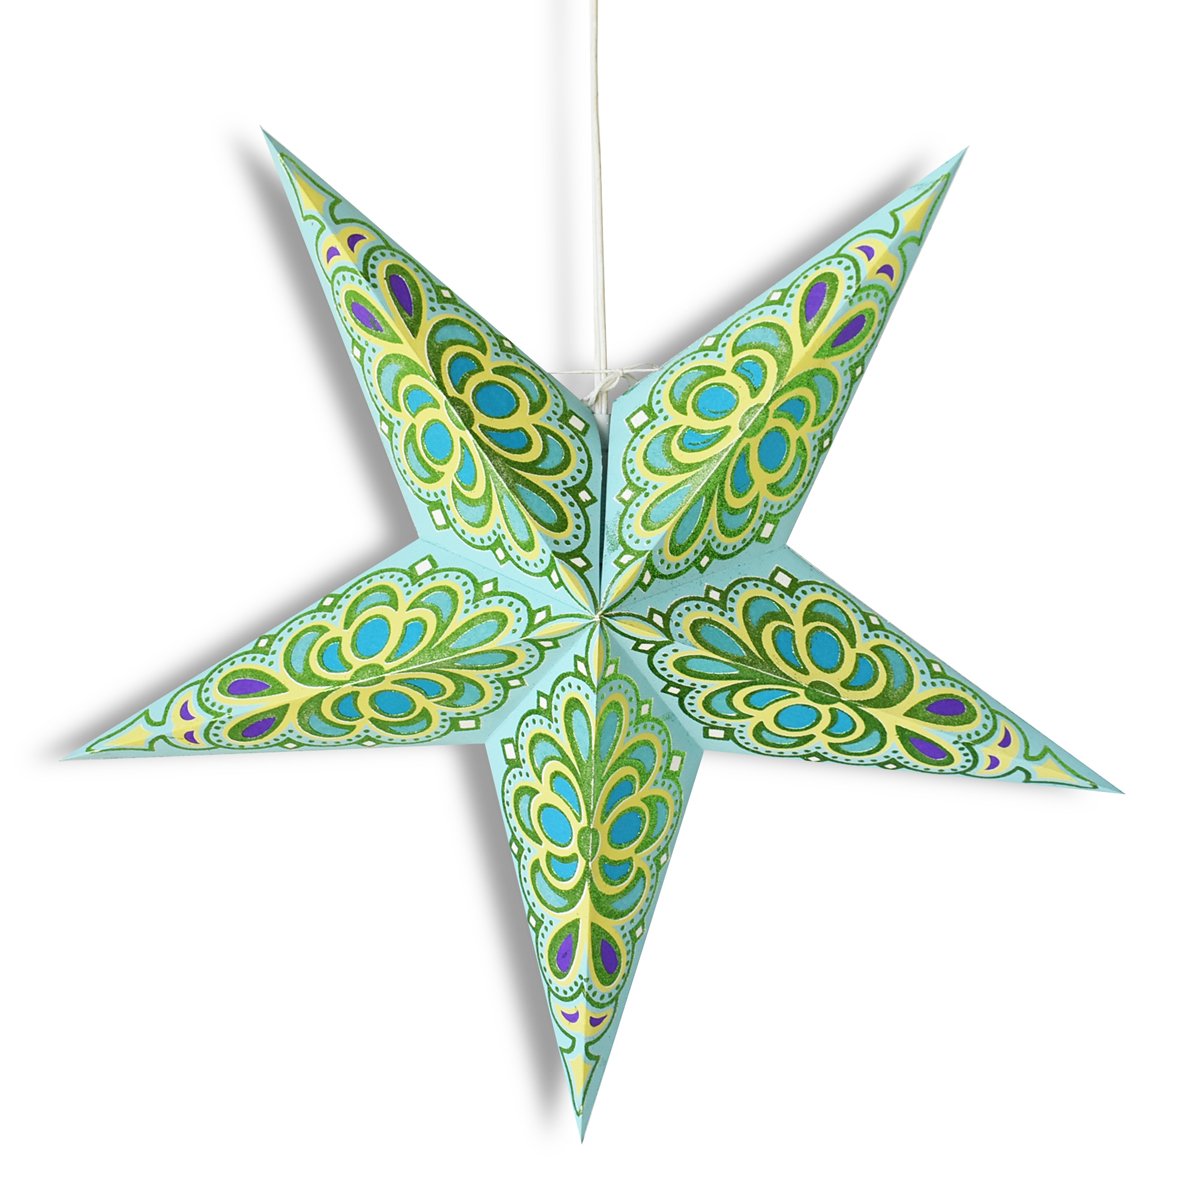 24" Green / Turquoise Merry Gold Glitter Paper Star Lantern, Chinese Hanging Wedding & Party Decoration - AsianImportStore.com - B2B Wholesale Lighting and Decor